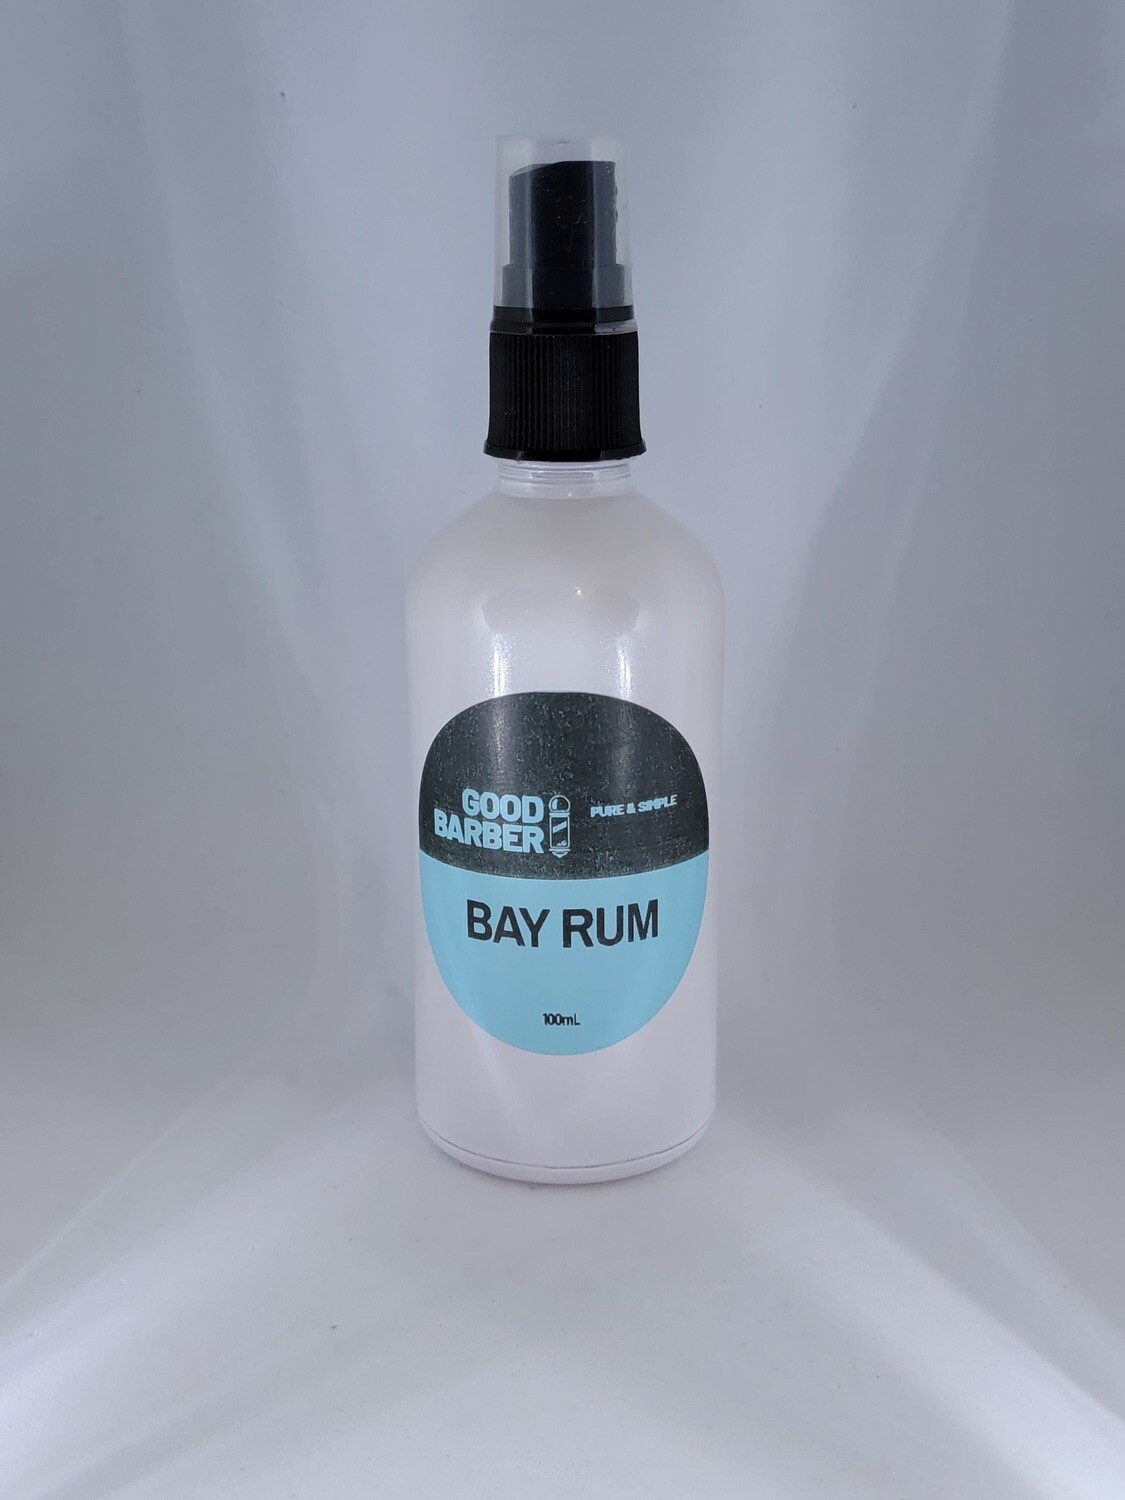 AFTER SHAVE - GOOD BARBERS BAY RUM  100mL PEARL WHITE Spray Bottle